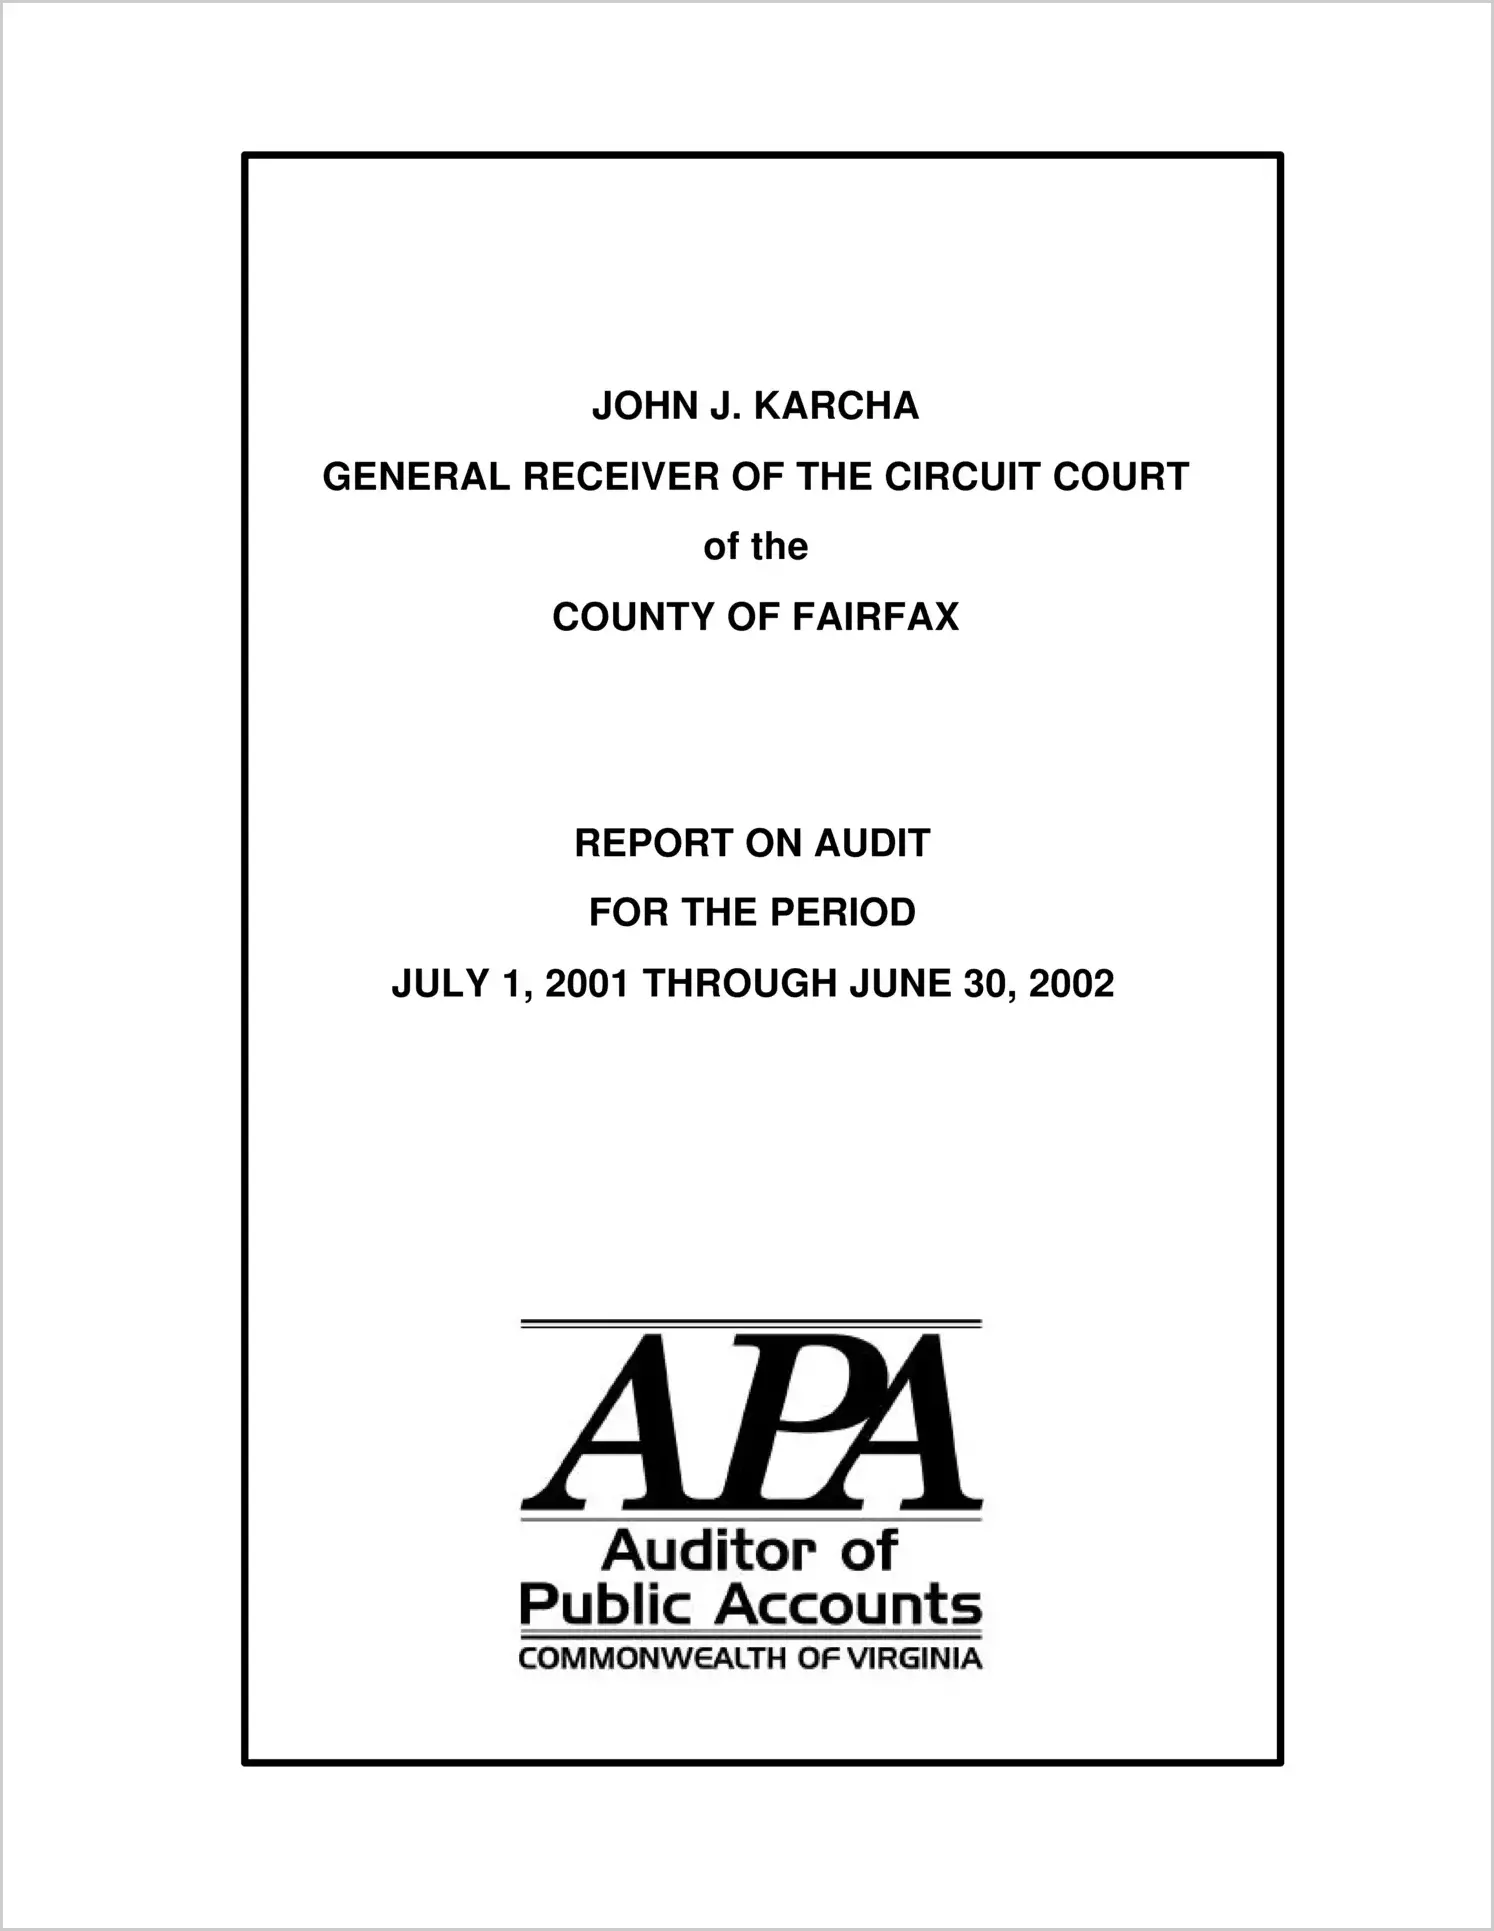 General Receiver of the Circuit Court of the County of Fairfax for the period July 1, 2001 through June 30, 2002